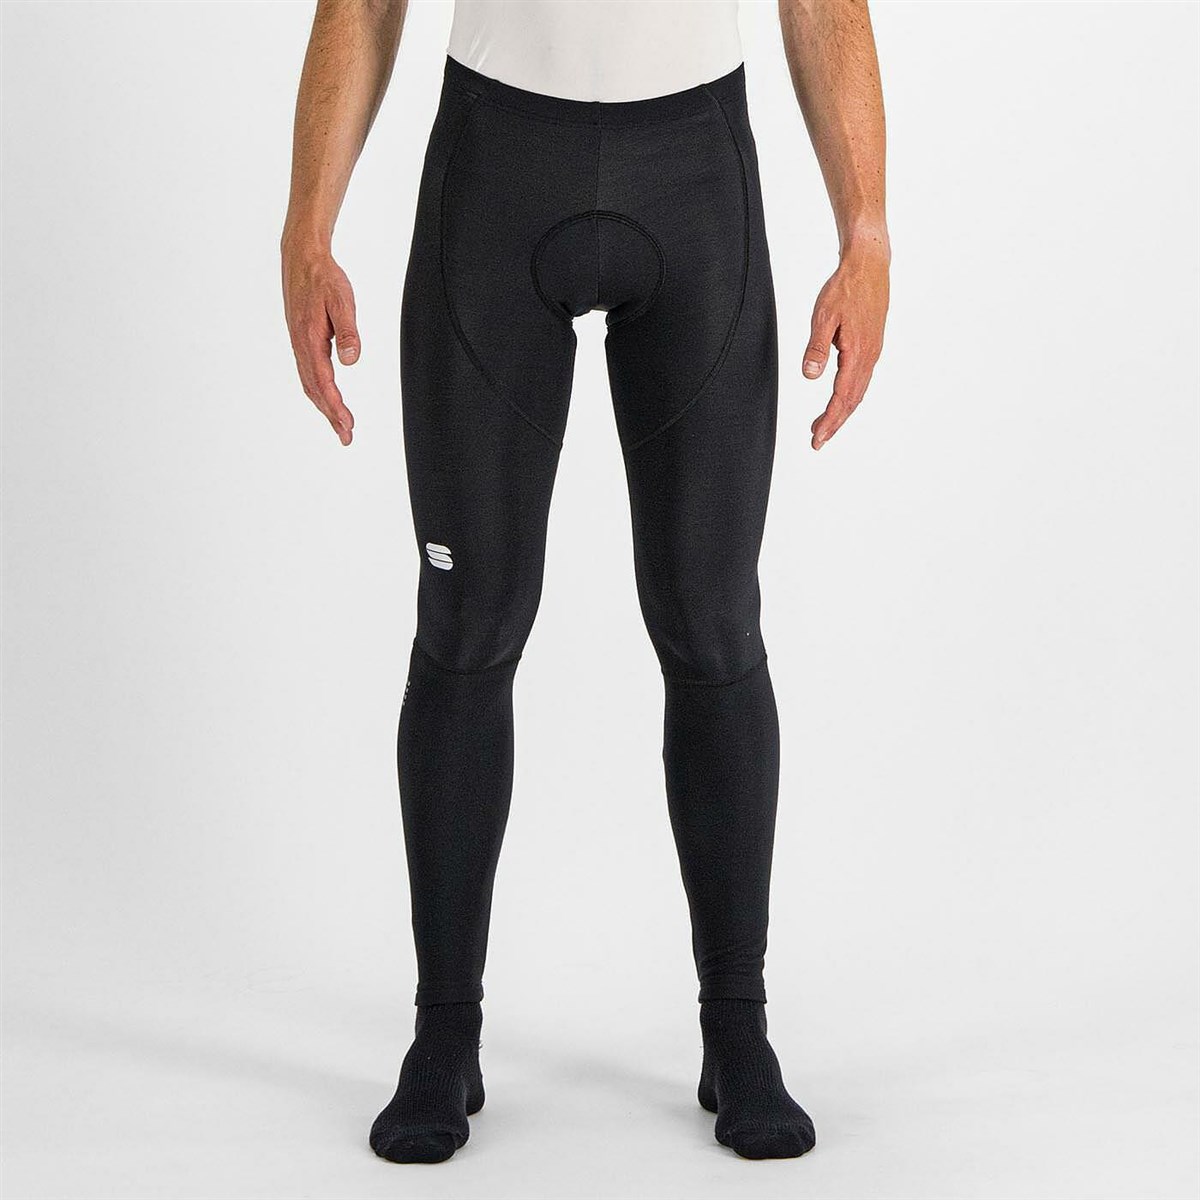 Sportful Neo Tights product image